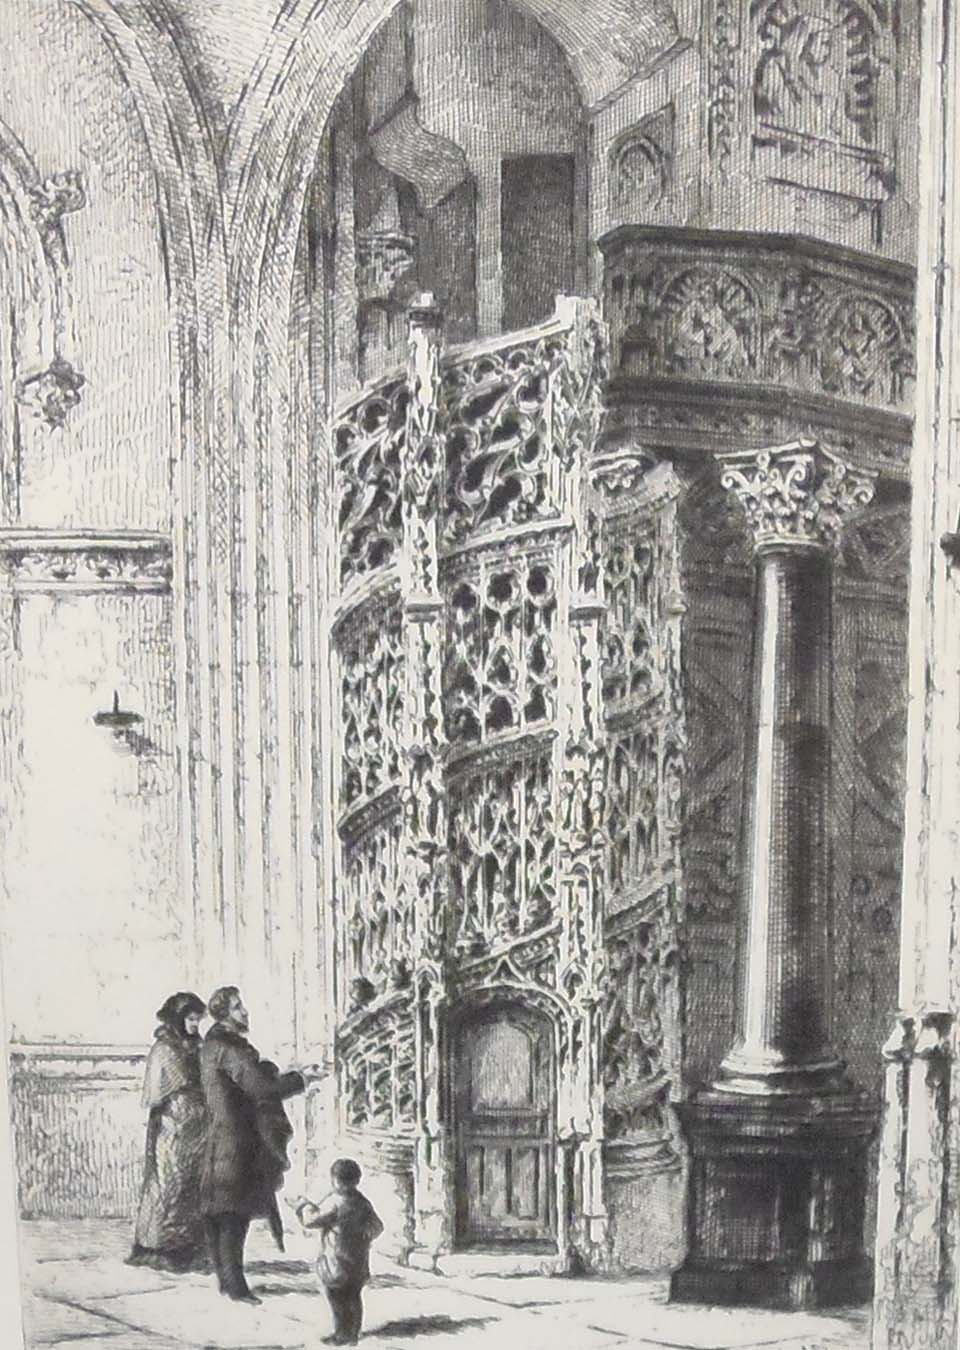 Etching by J Adeline of Escalier de St Maclou in Rouen. Printed in Paris by A Salmon and edited by E Áuge